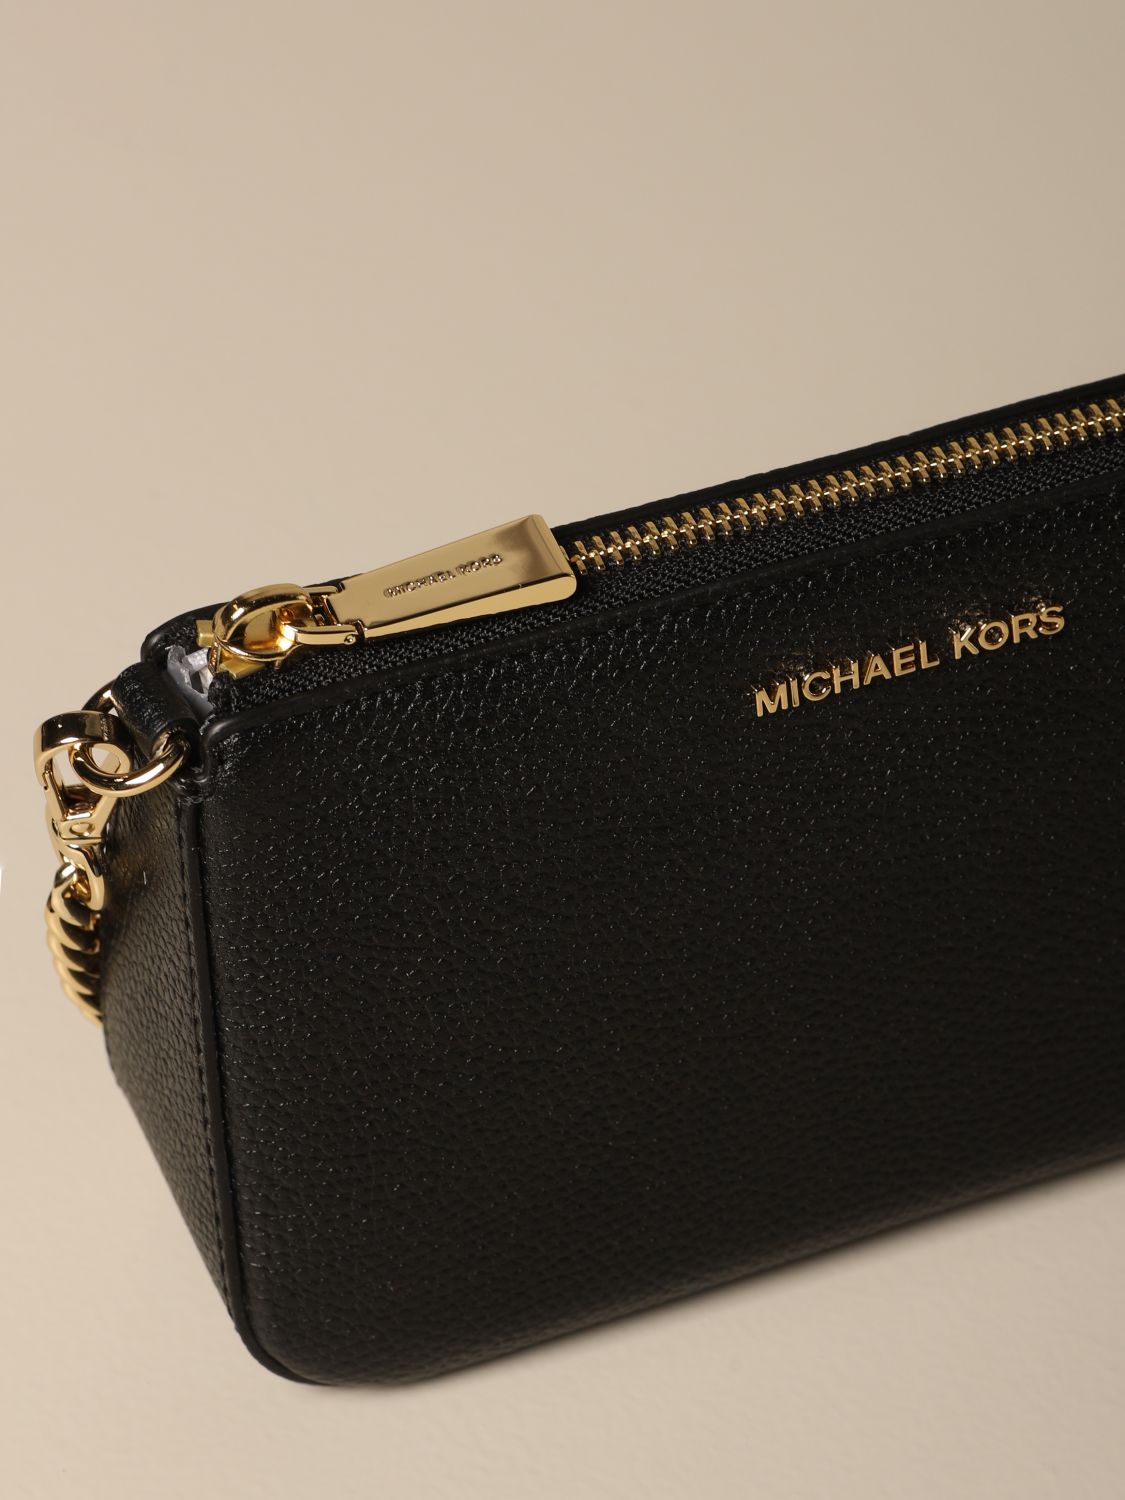 MICHAEL KORS: Michael chain clutch in grained leather - Black | Michael